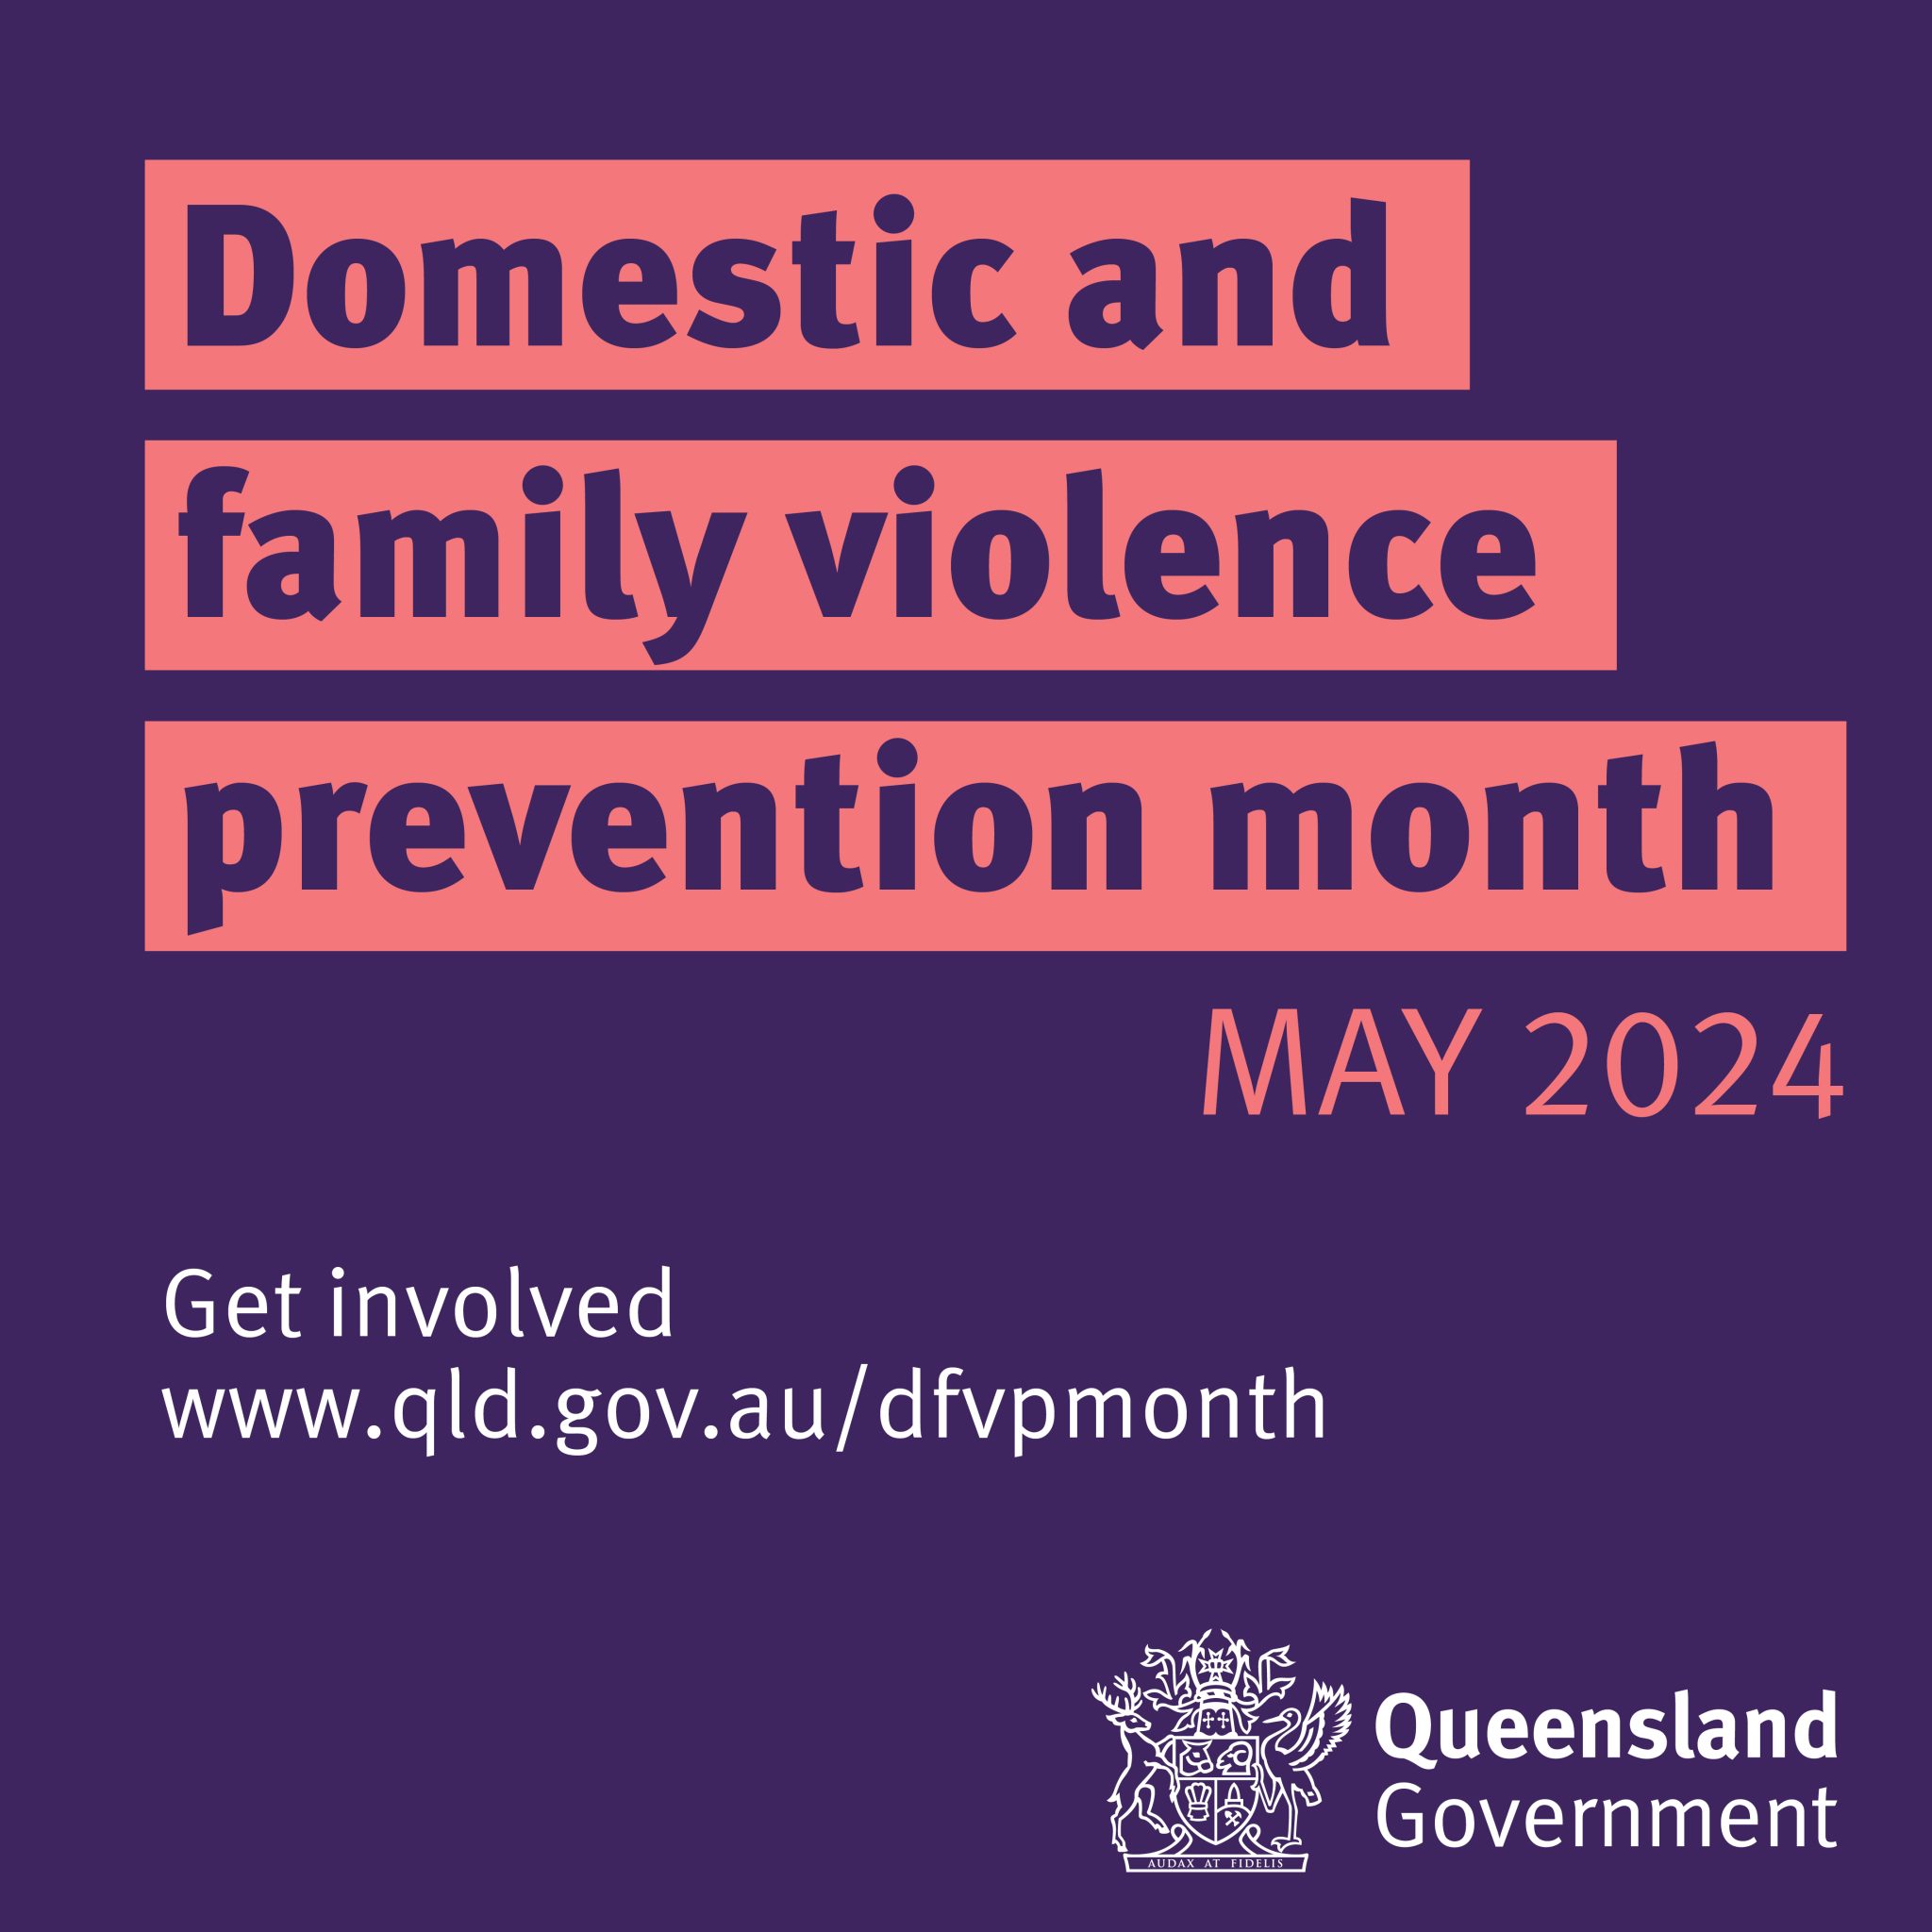 Please click the below 'Find Out More' to read more about DFV Prevention Month 2024